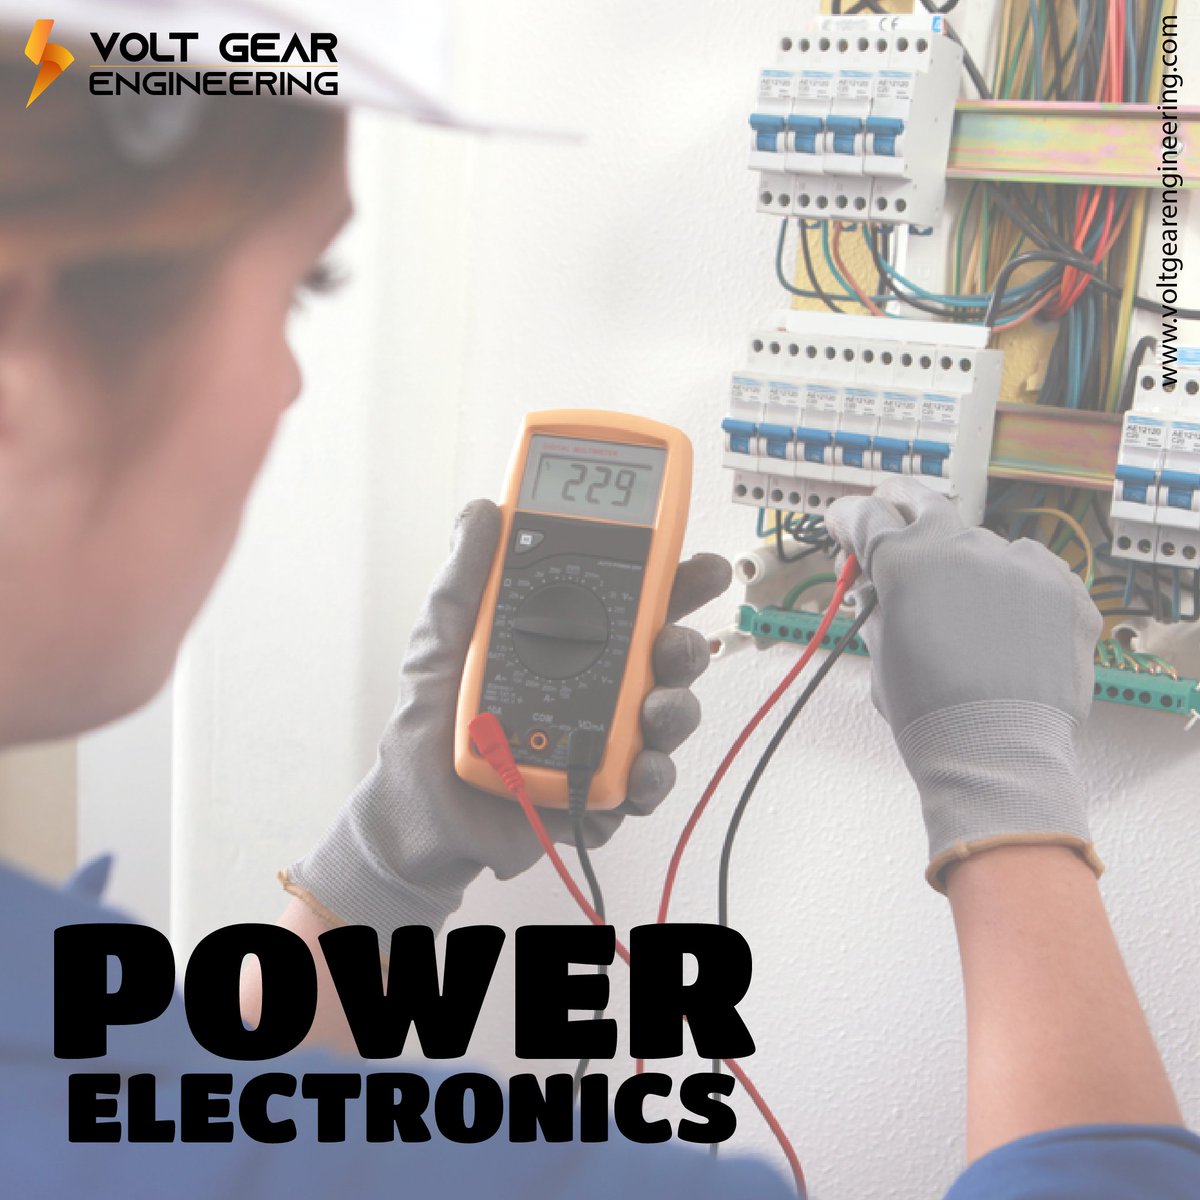 Empower your devices with our advanced power electronics solutions! ⚡️ From efficient power conversion to sustainable energy solutions, we're driving the future of technology. Let's revolutionize the way you harness power. 
.
.
#powerelectronics #voltgearengineering #Innovation